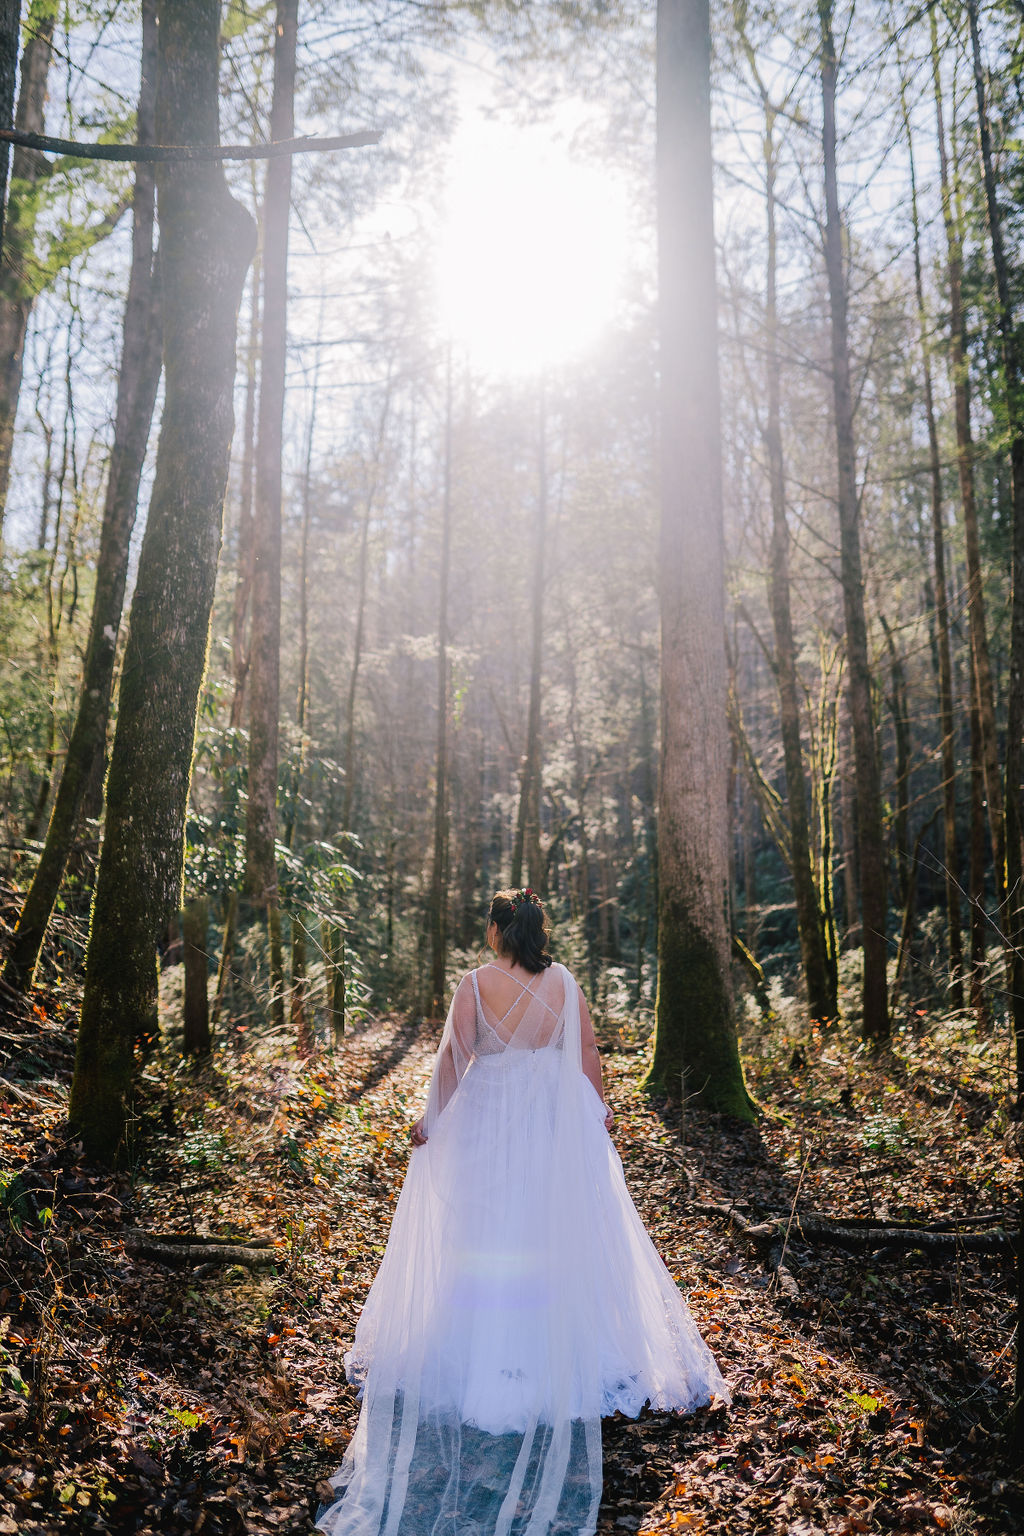 Smoky Mountain wedding photographer captures a bride walking into the woods as the sun gleams through the tall tree